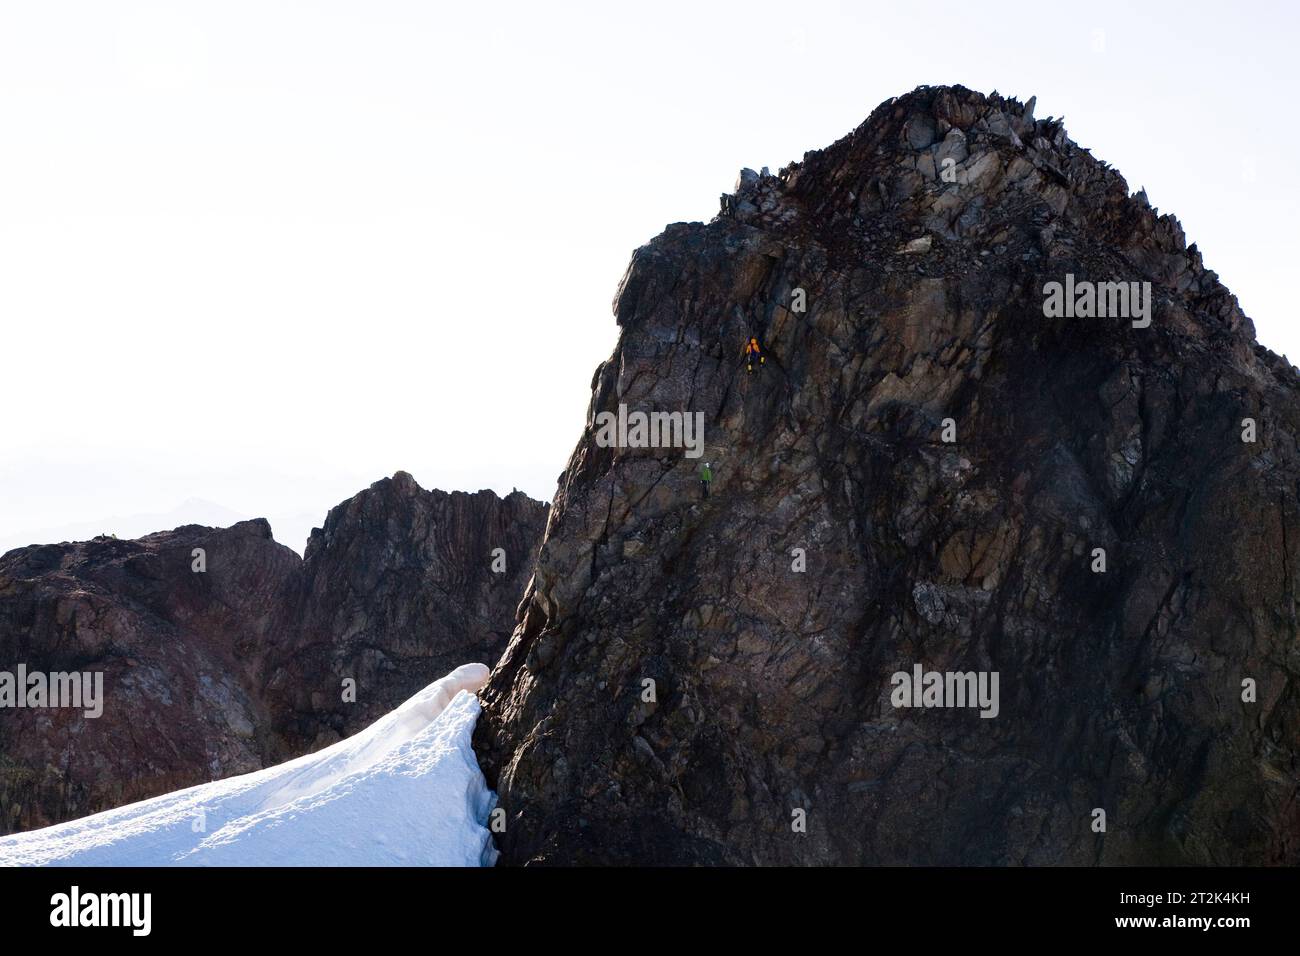 Two climbers scale the summit block of Mt. Olympus on the Olympic Peninsula, WA. Stock Photo